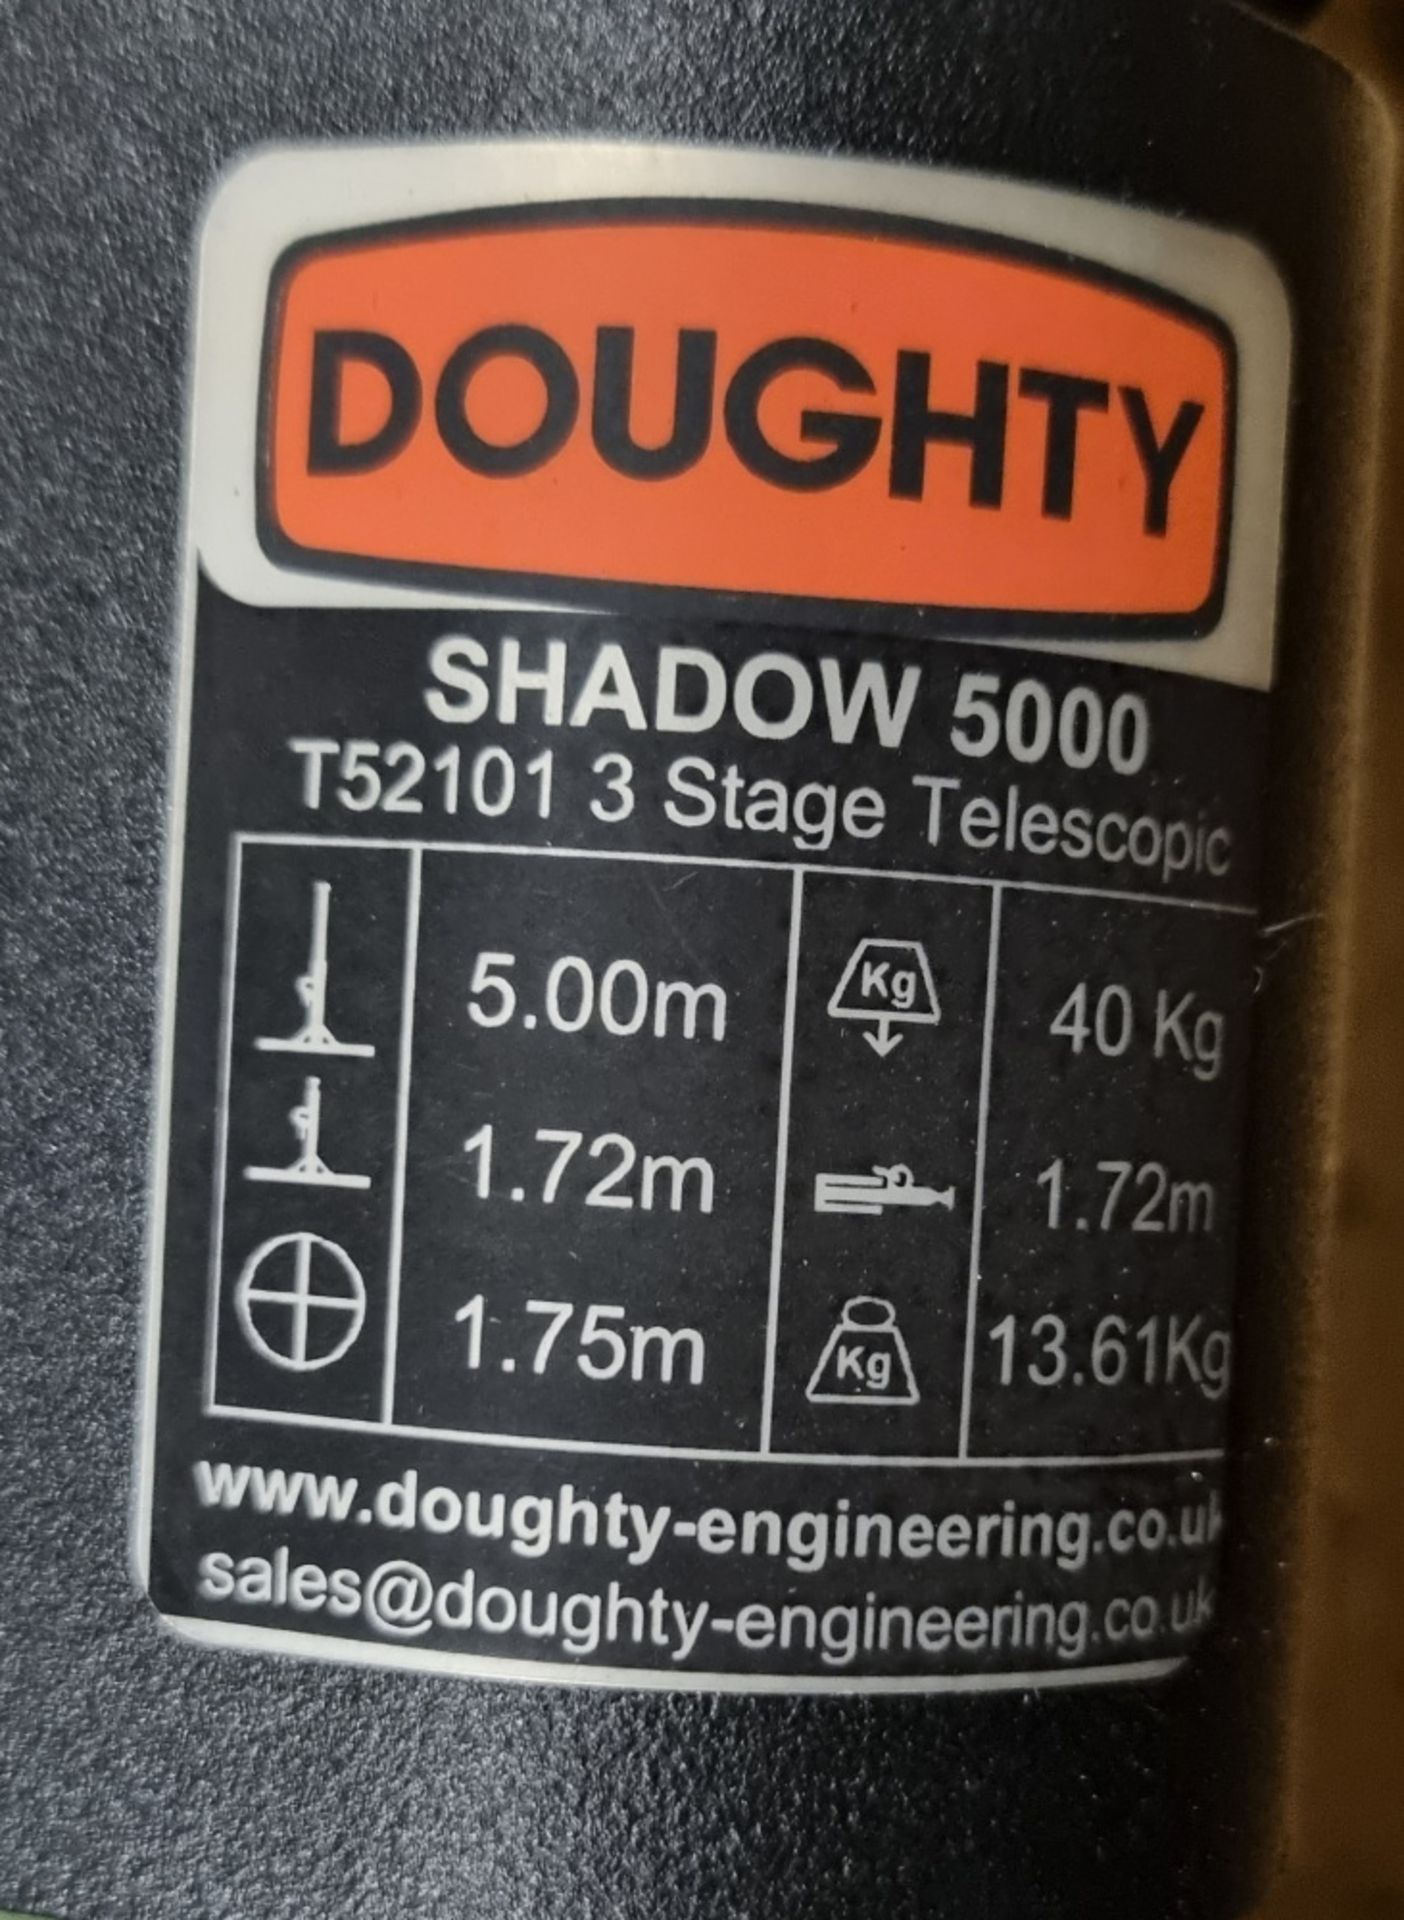 2x Doughty T52101, Shadow 5000 3 Section Stands - L1.75 x W1.75 x H1.72 - Image 3 of 3